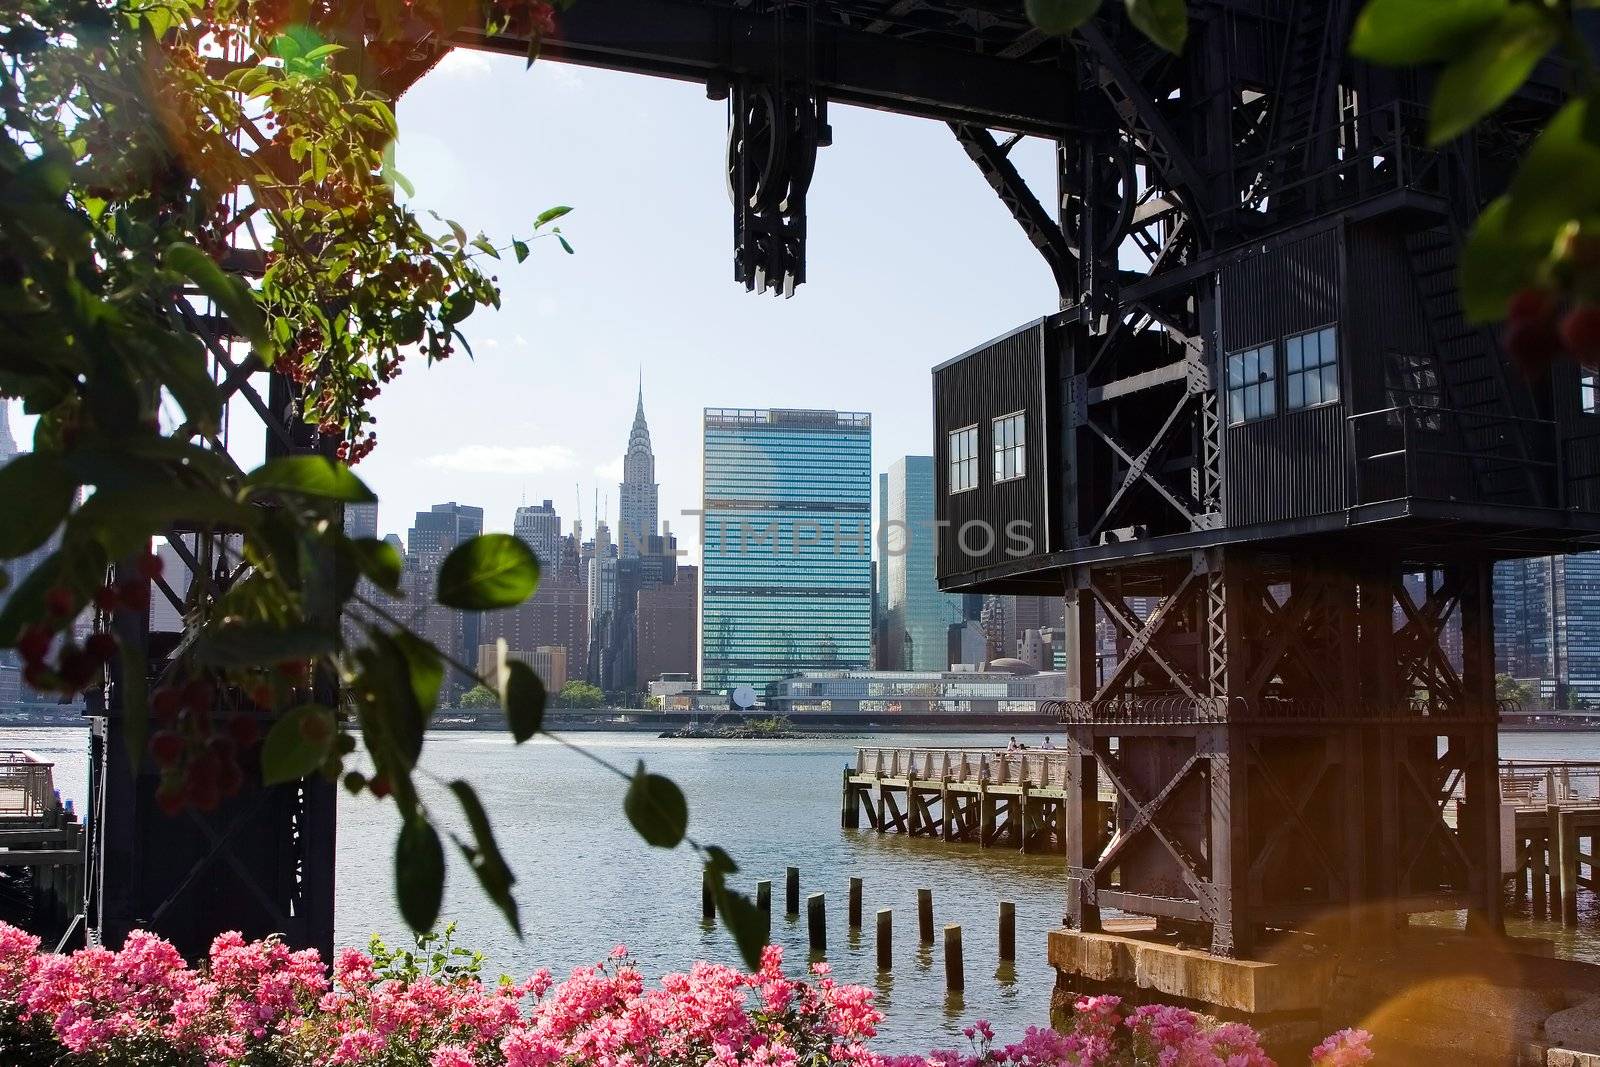 The skyline of midtown Manhattan (New York City) as seen from Long Island City, with the United Nations and Crysler building. A tue vision of New York's floral beauty combined with industry, as the part of the skyline is naturally framed with flowers and a shipyard crane. 